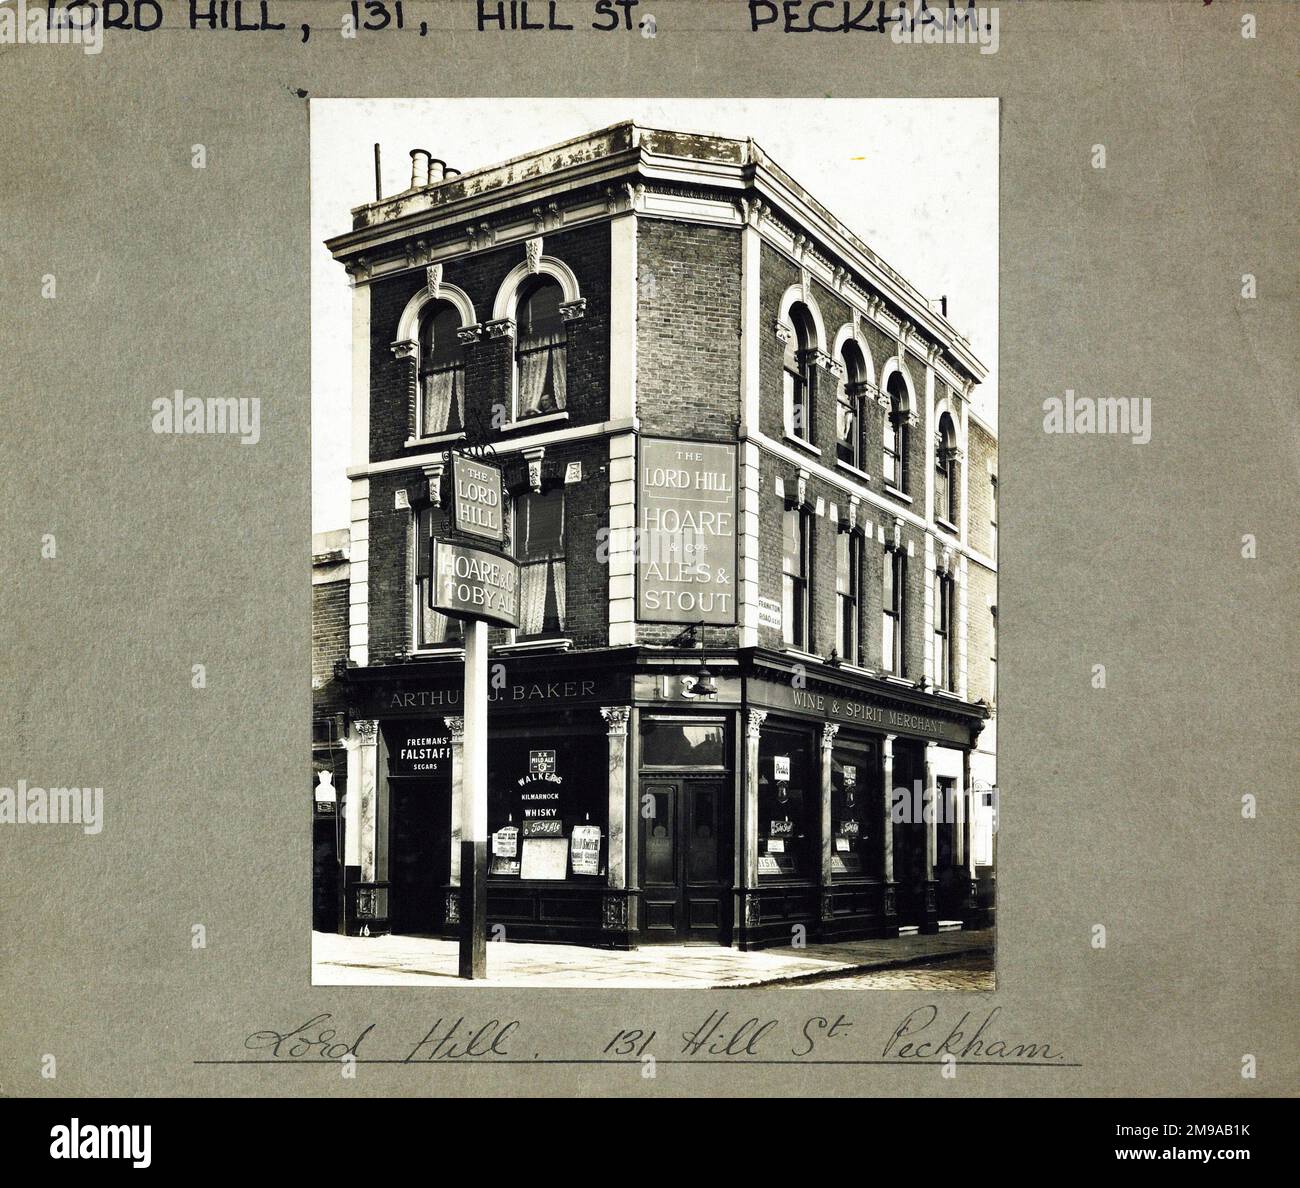 Photograph of Lord Hill PH, Peckham, London. The main side of the print (shown here) depicts: Corner on view of the pub.  The back of the print (available on request) details: Nothing for the Lord Hill, Peckham, London SE15 5UE. As of July 2018 . Closed and demolished Stock Photo